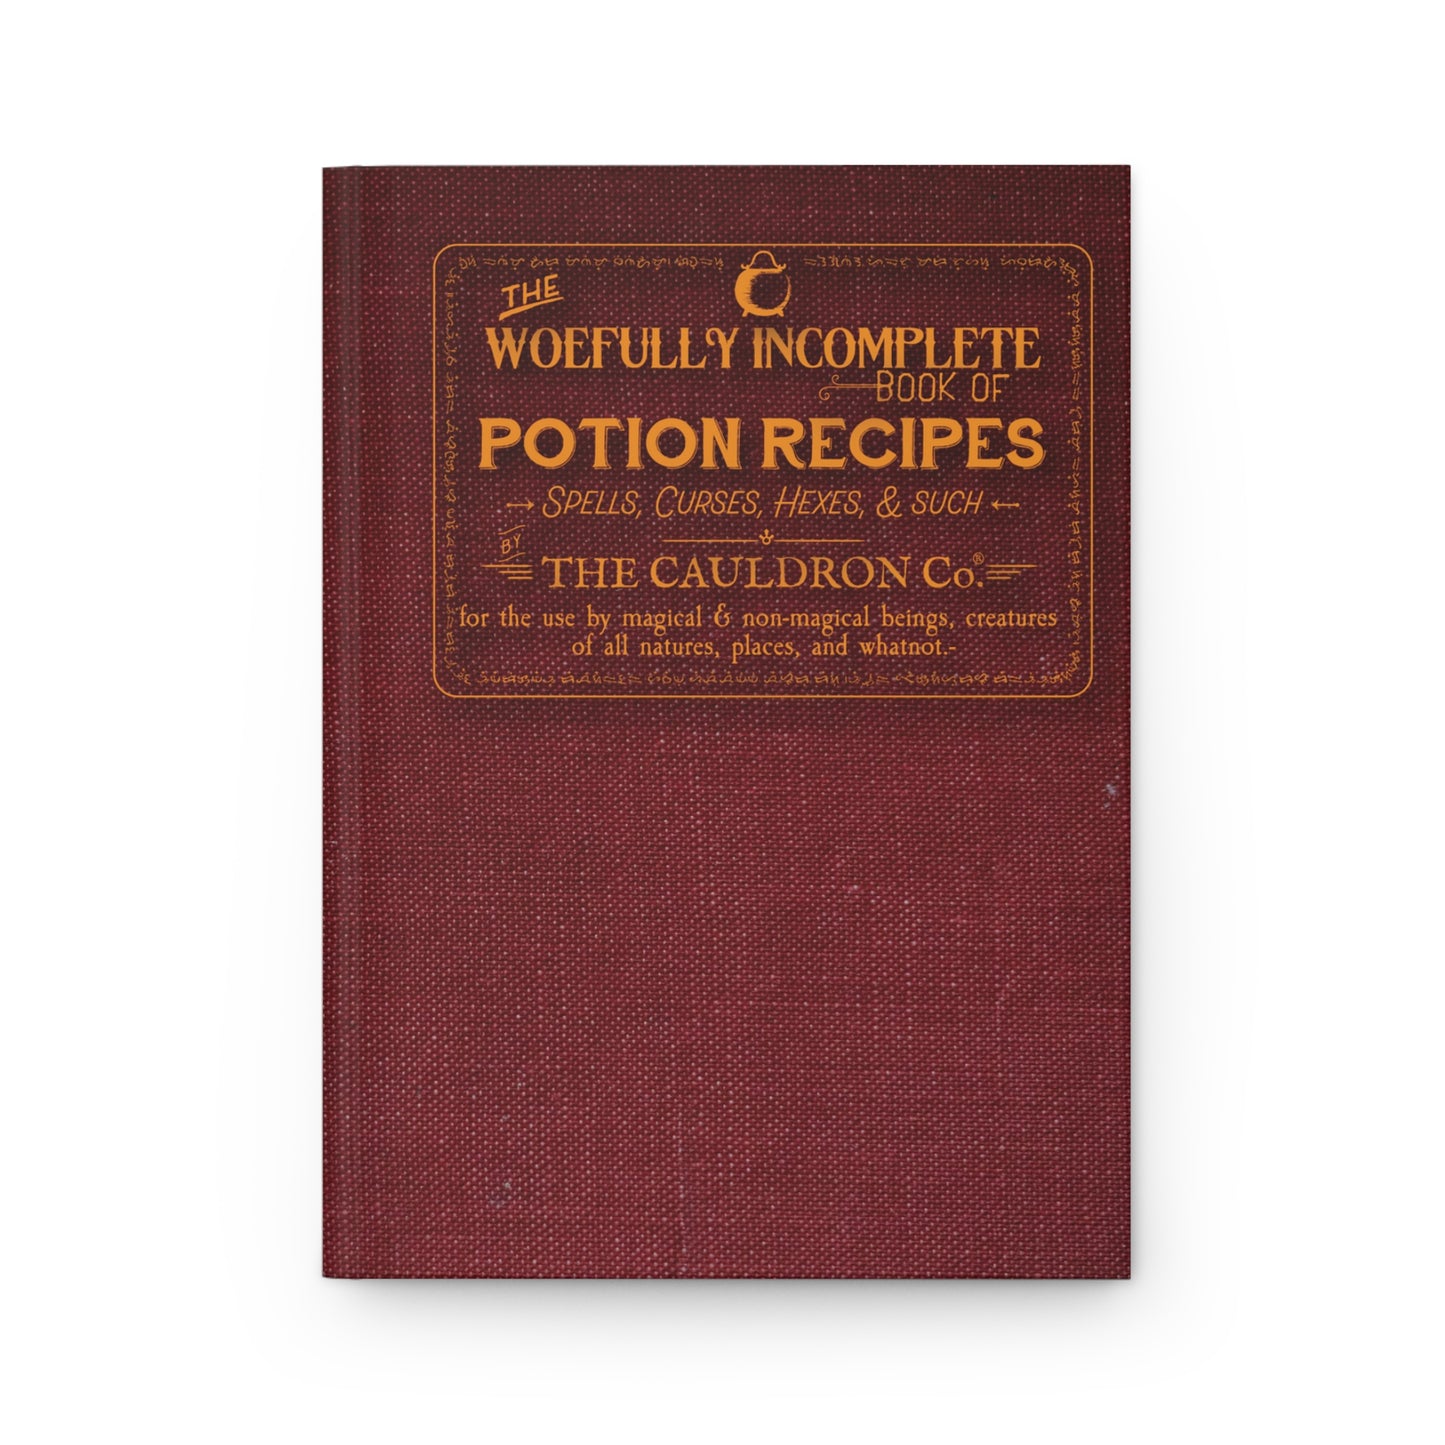 The Woefully Incomplete Book of Potions Recipes -  Hardcover Journal